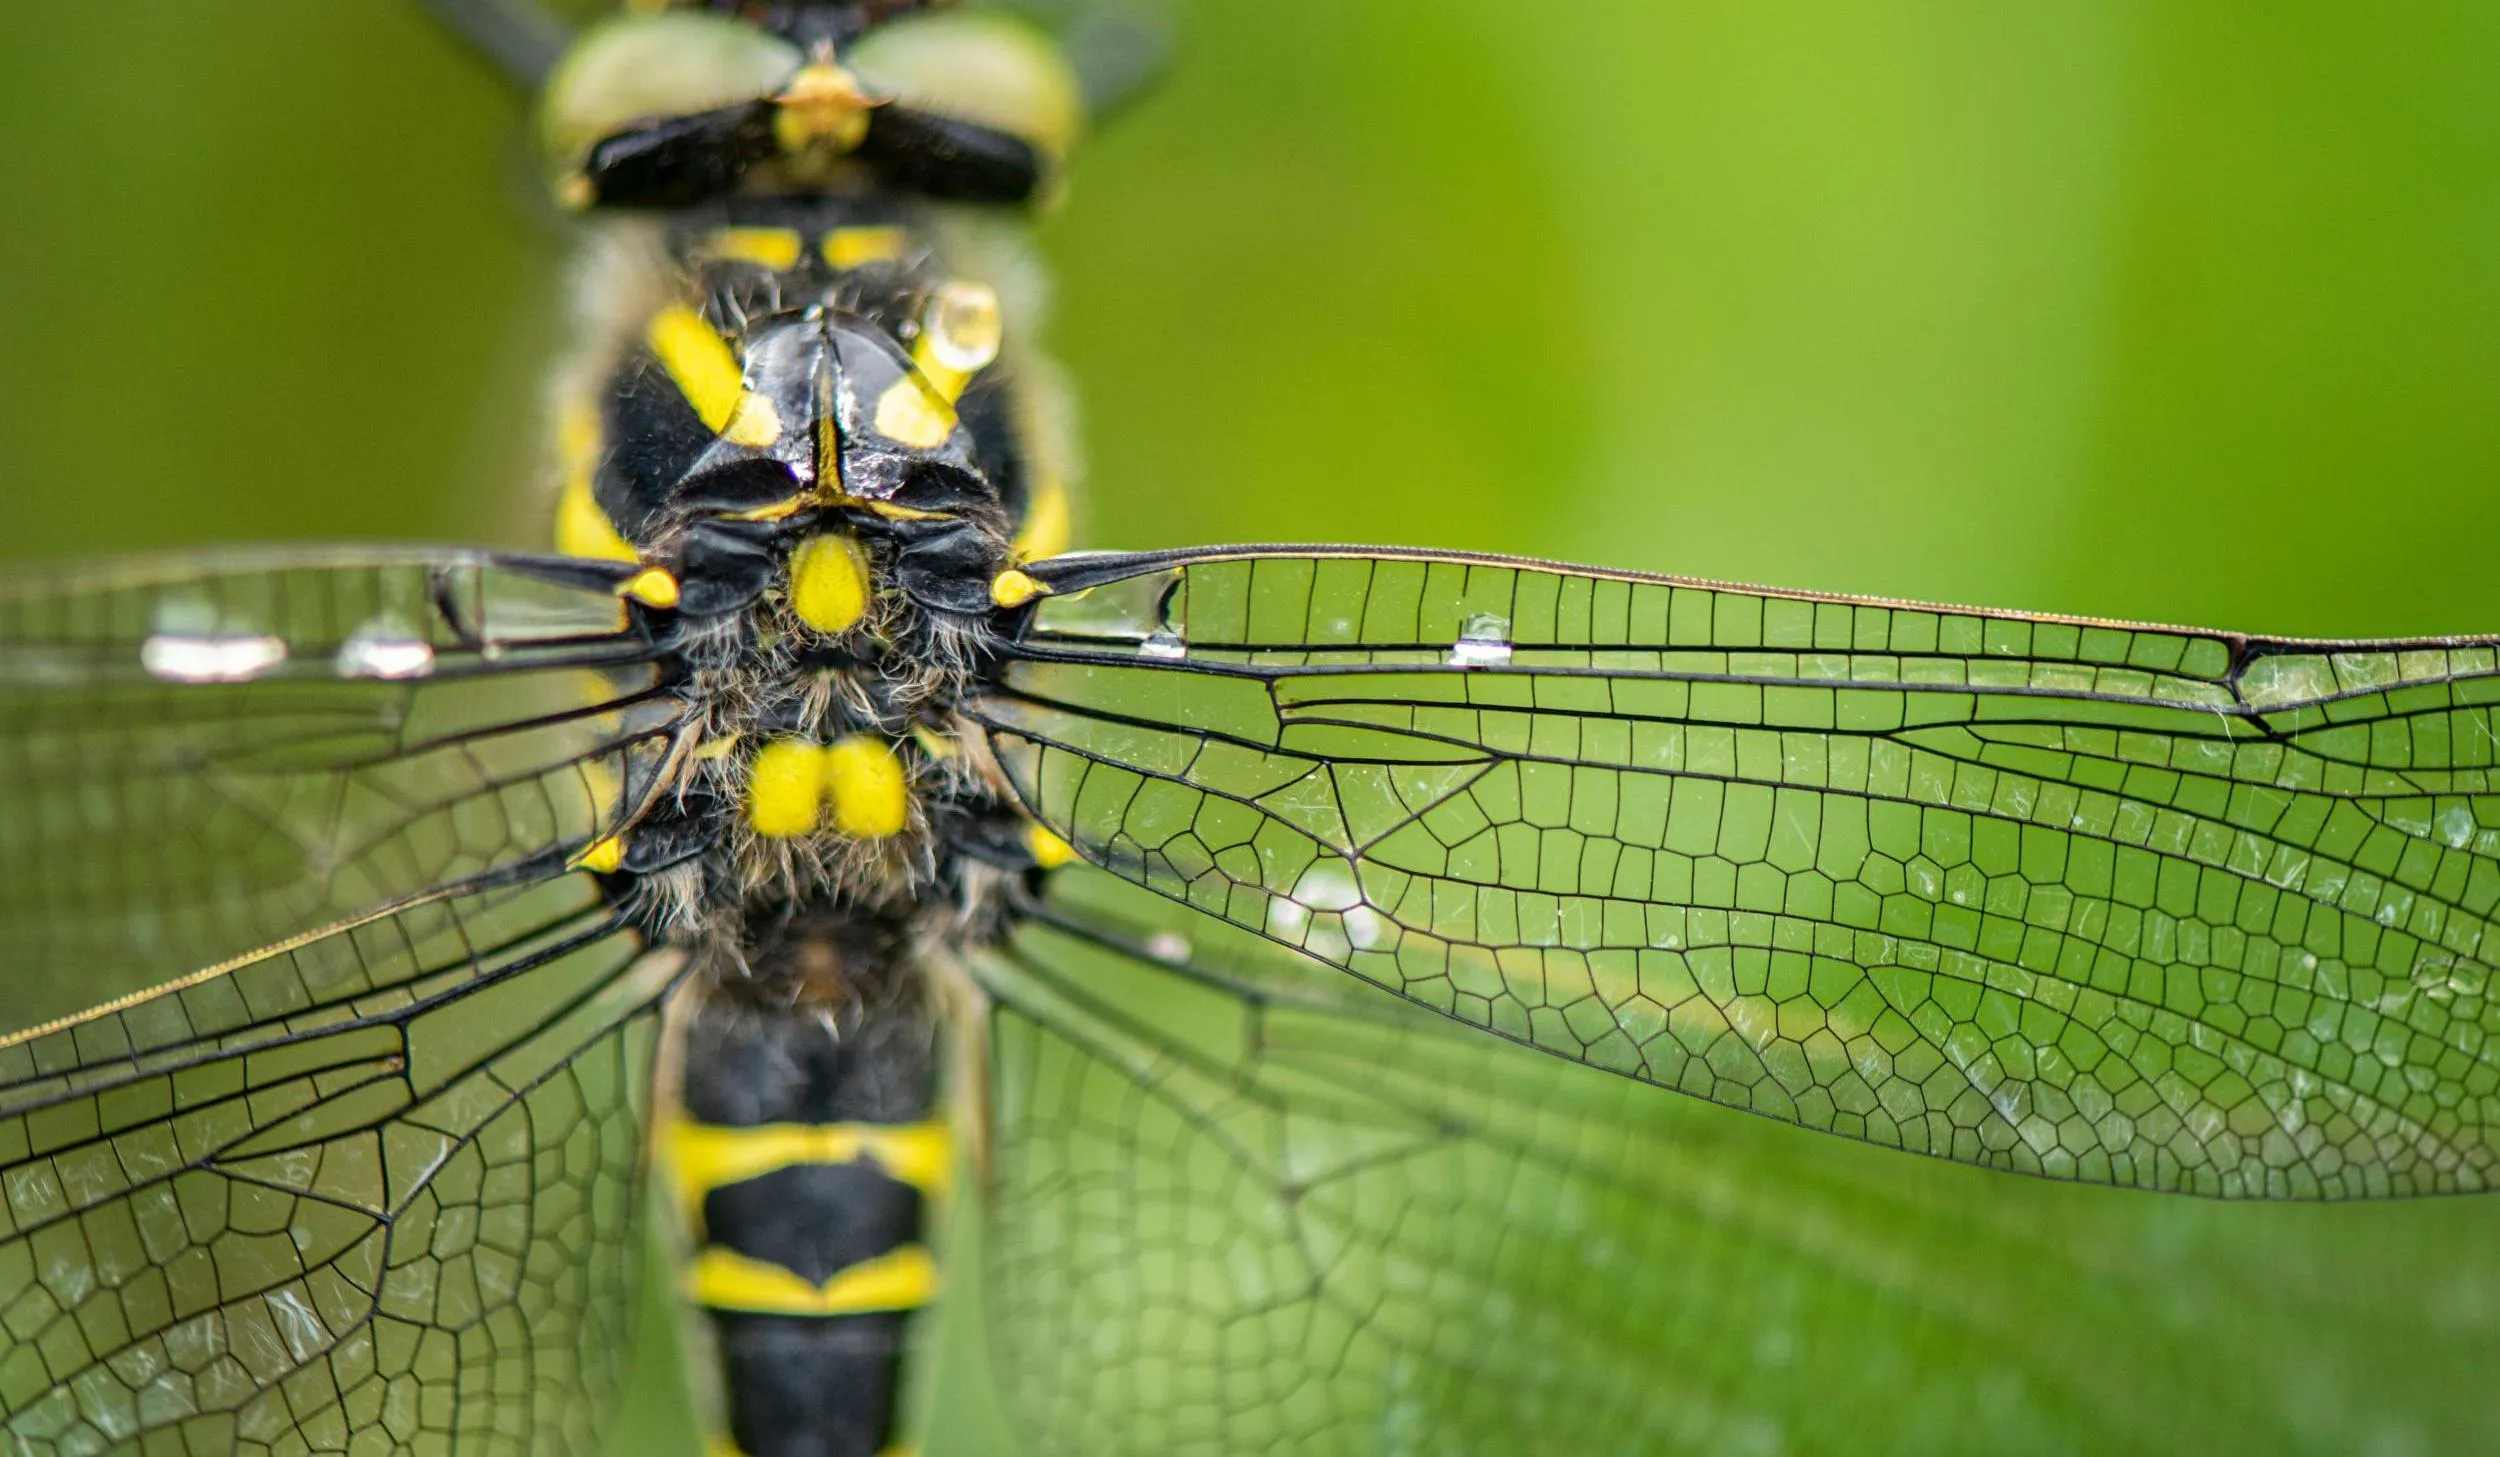 Aerial, micro view of a Golden Ringed dragonfly